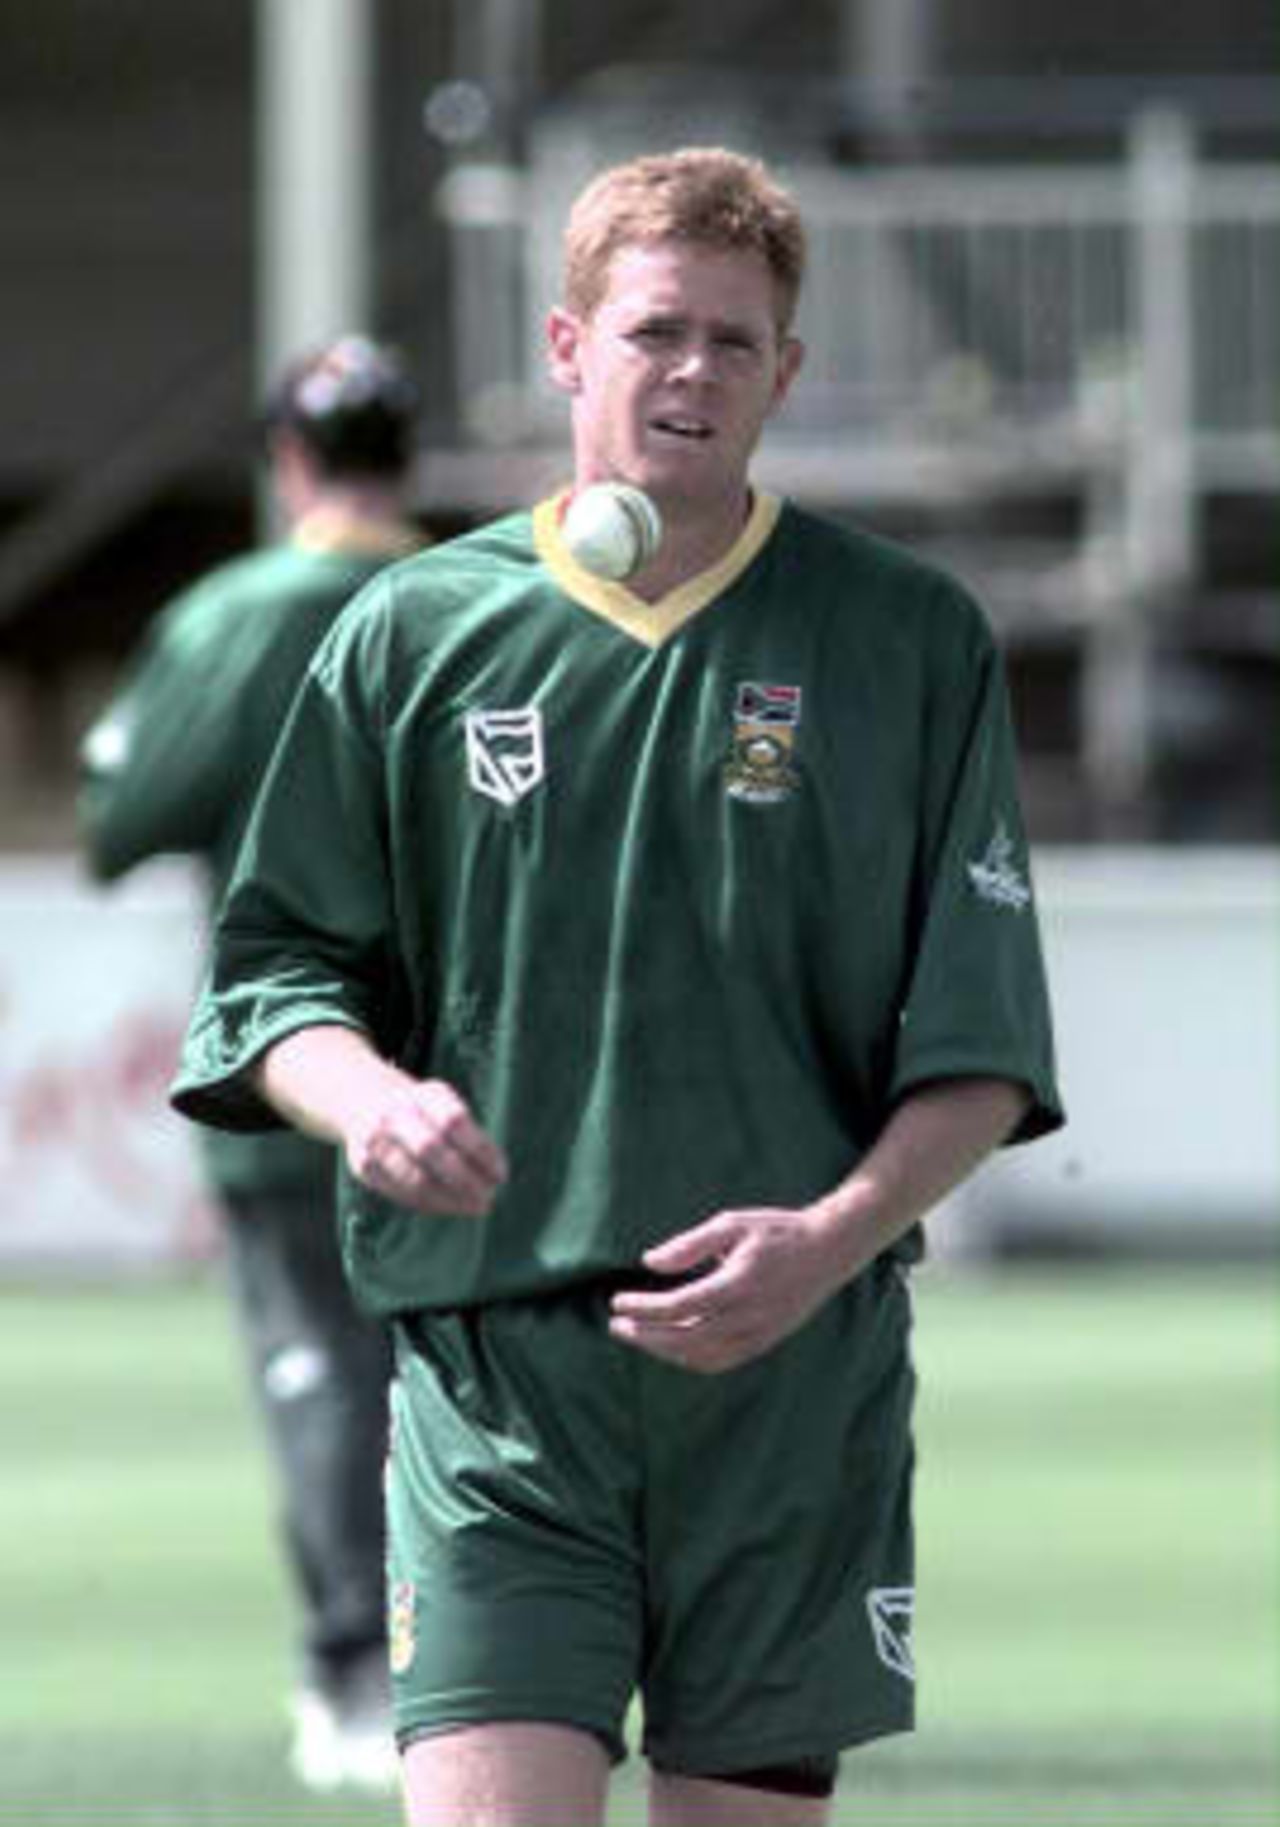 South Africa all rounder Shaun Pollock pauses in the nets at Edgbaston in Birmingham, ahead of the team's Cricket World Cup semi-final clash against Australia 17 June.